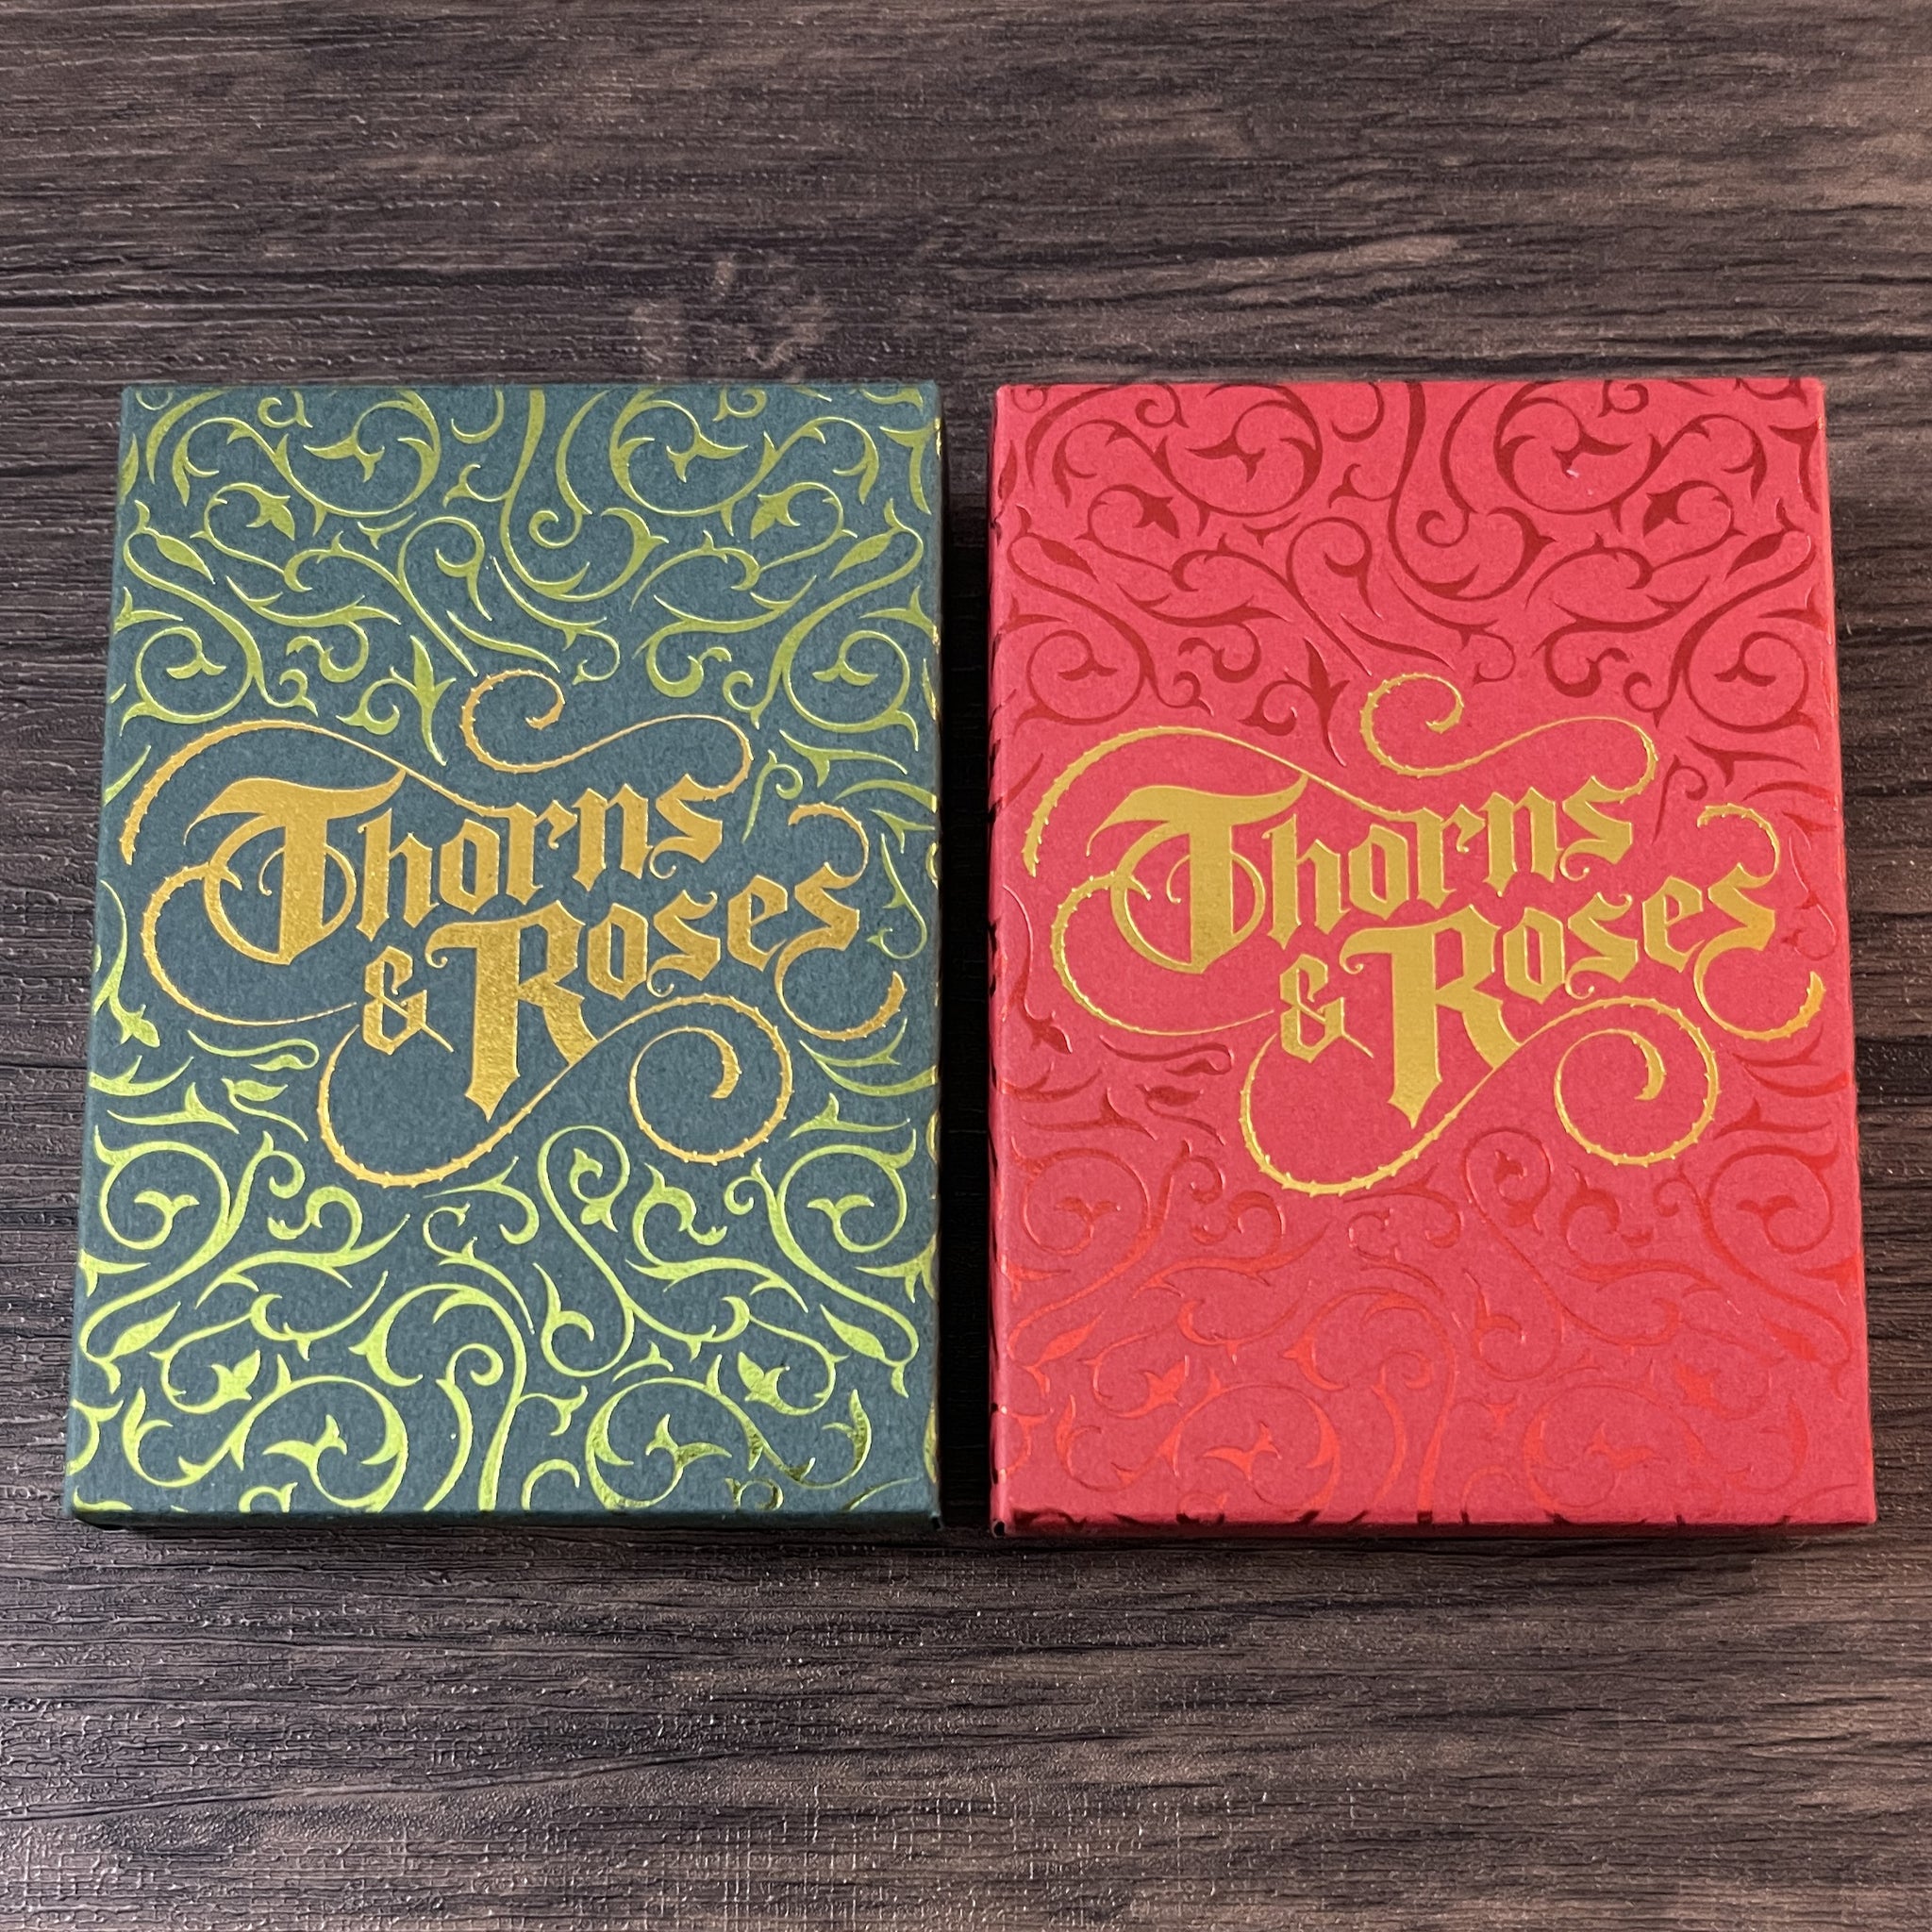 Thorns & Roses (Limited Editons) [AUCTION]